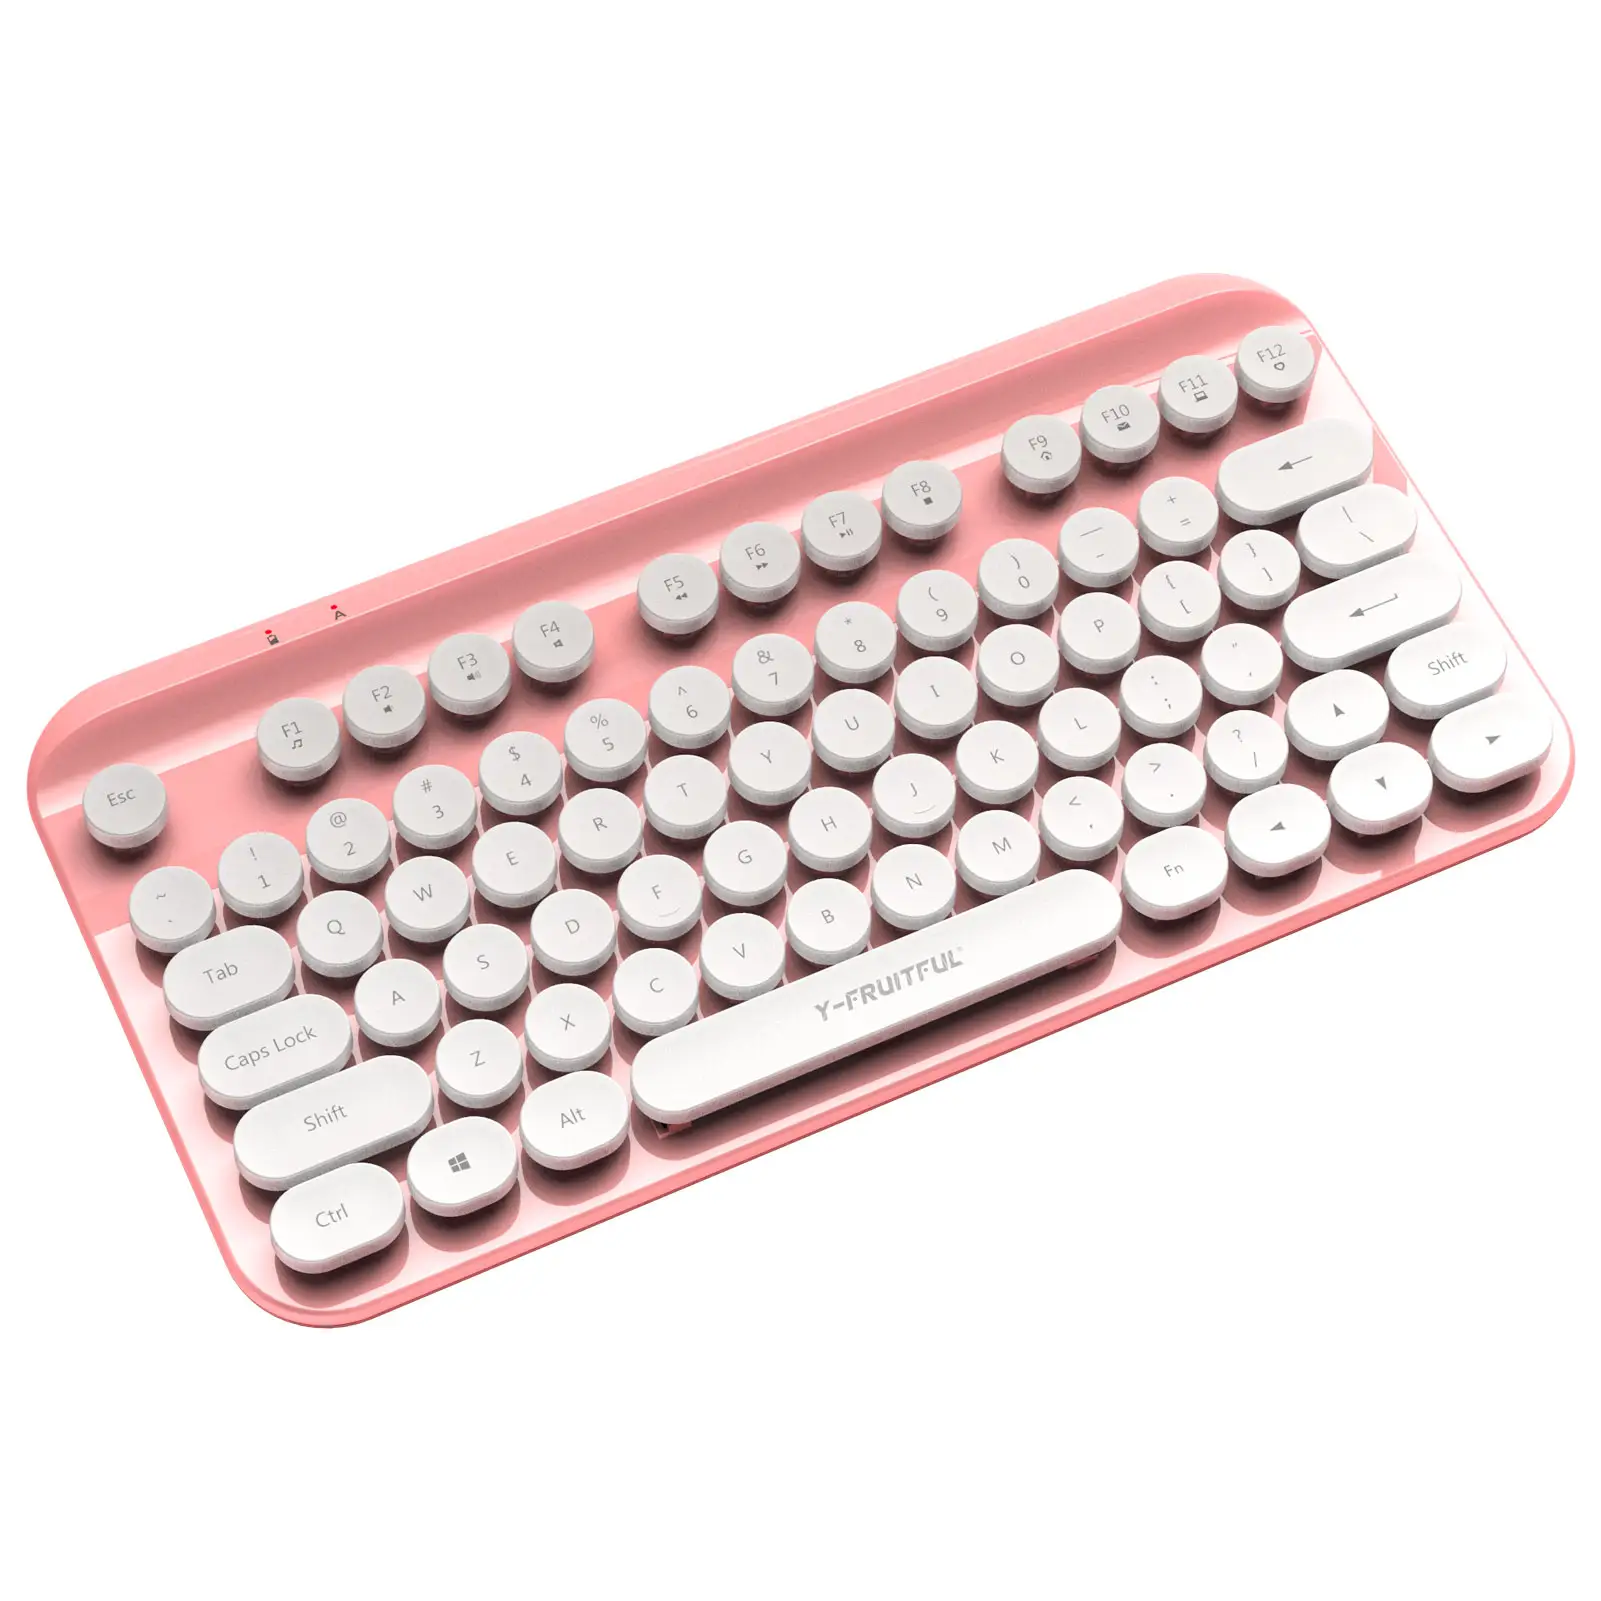 High quality top sale new arrival led Backlight Rainbow or green backlit 87 keys gaming portable wire keyboard